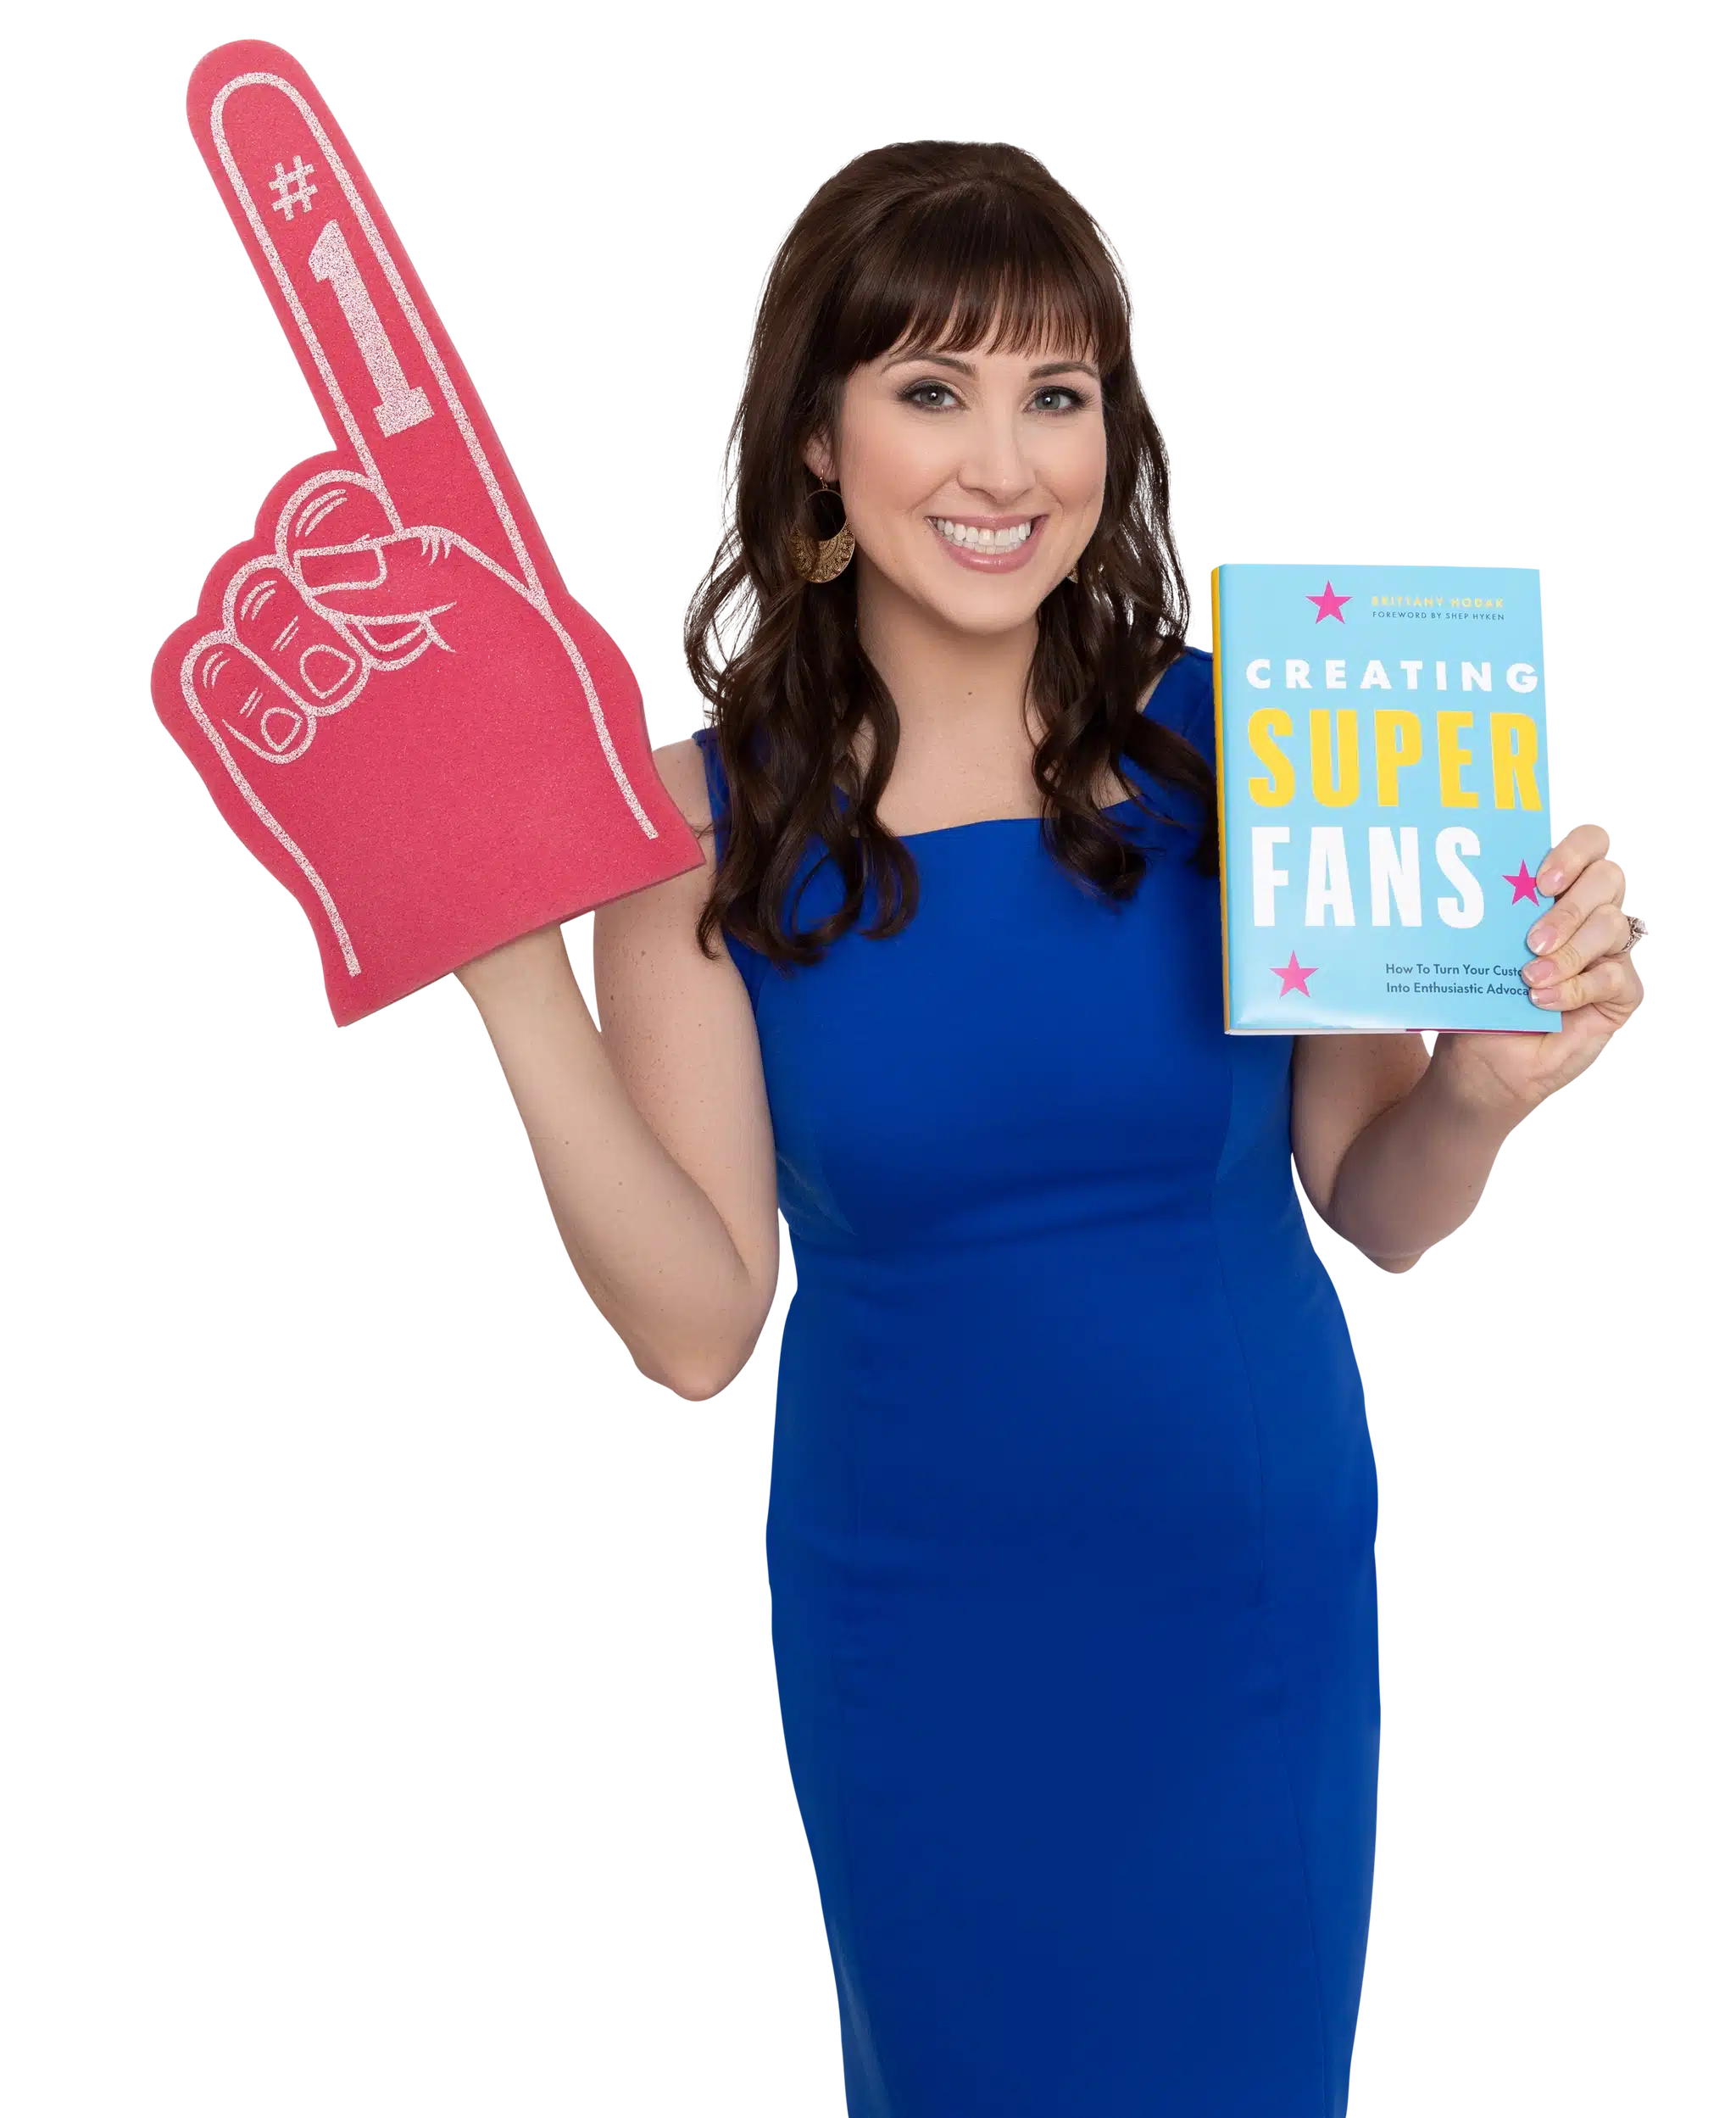 Brittany Hodak posing with pink foam finger and Creating superfans hardcover book - Motivational and Customer Experience Keynote Speaker